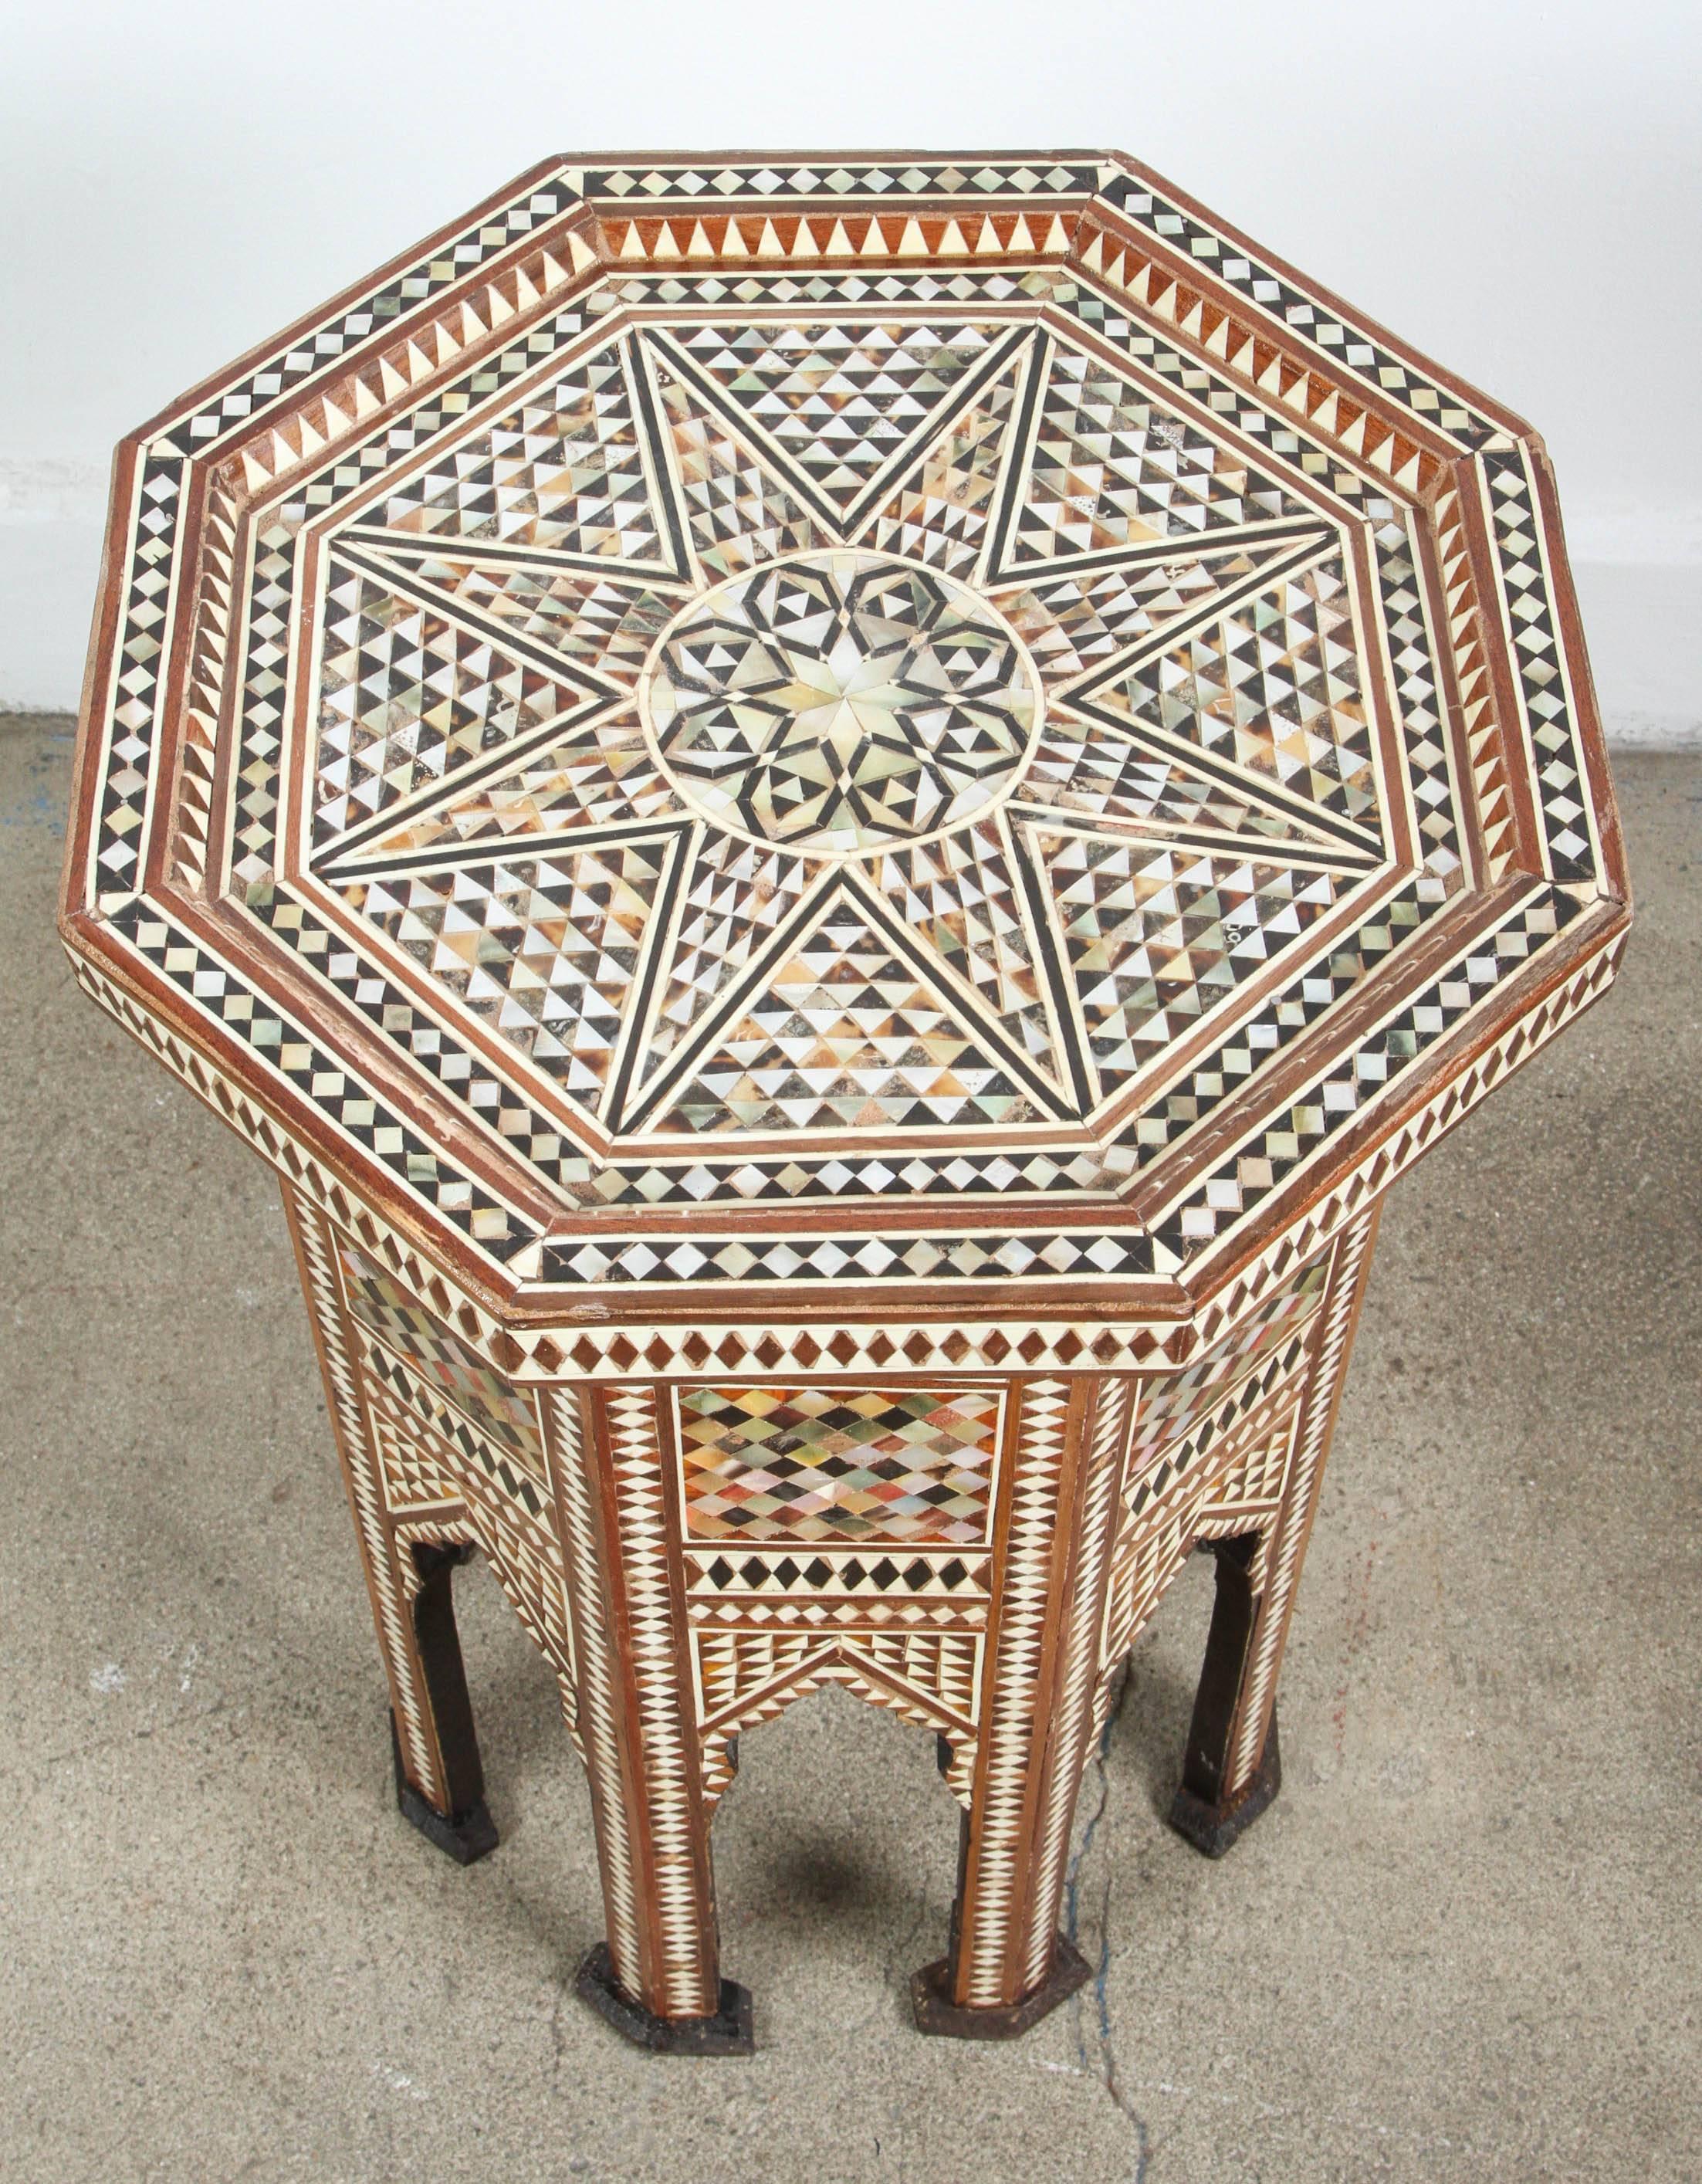 20th Century Moorish Octagonal Tables Inlay with Mother of Pearl